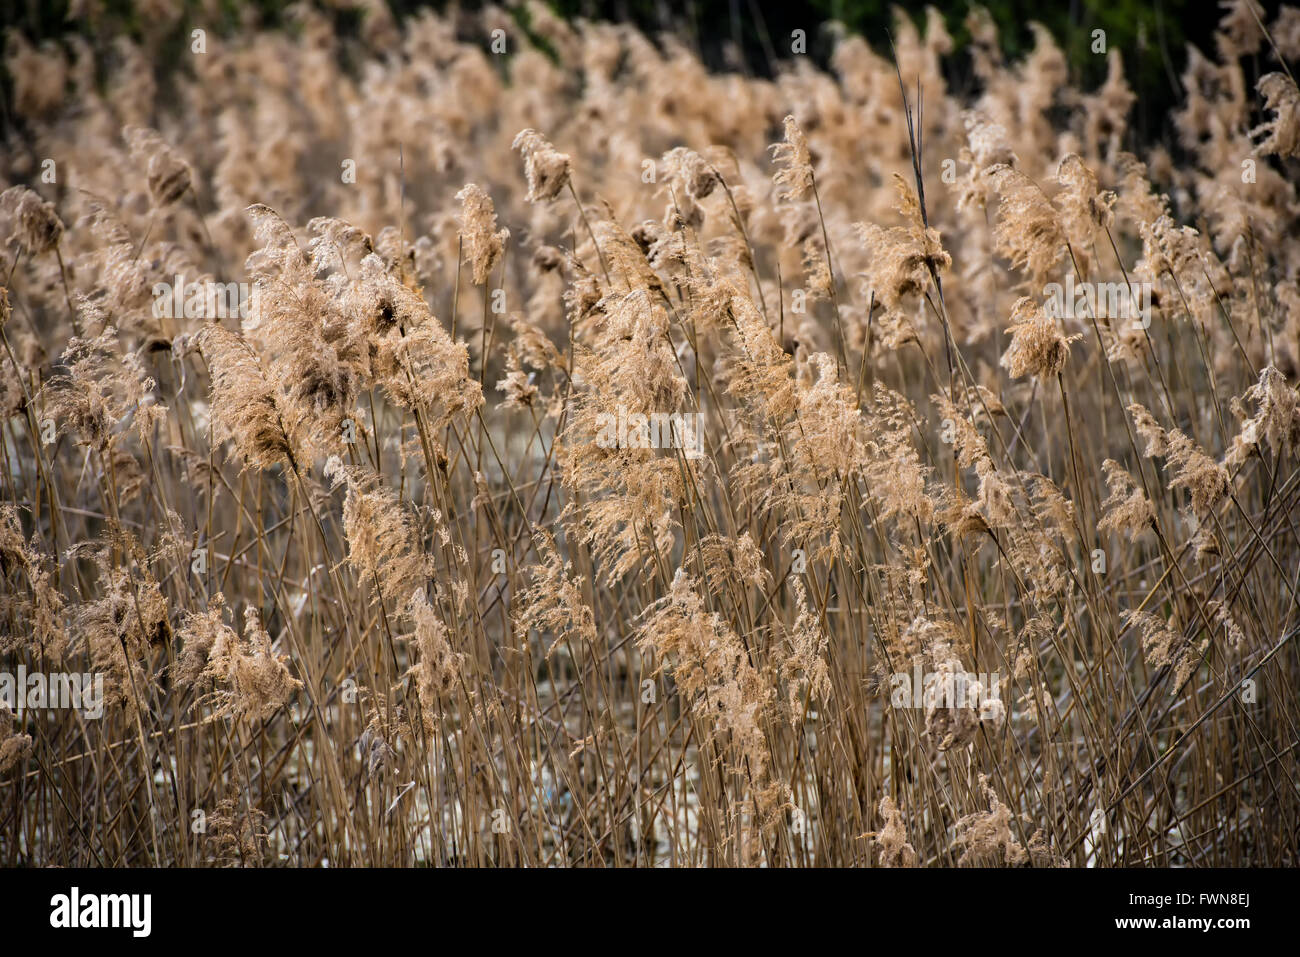 Field of dry rush in natural light Stock Photo